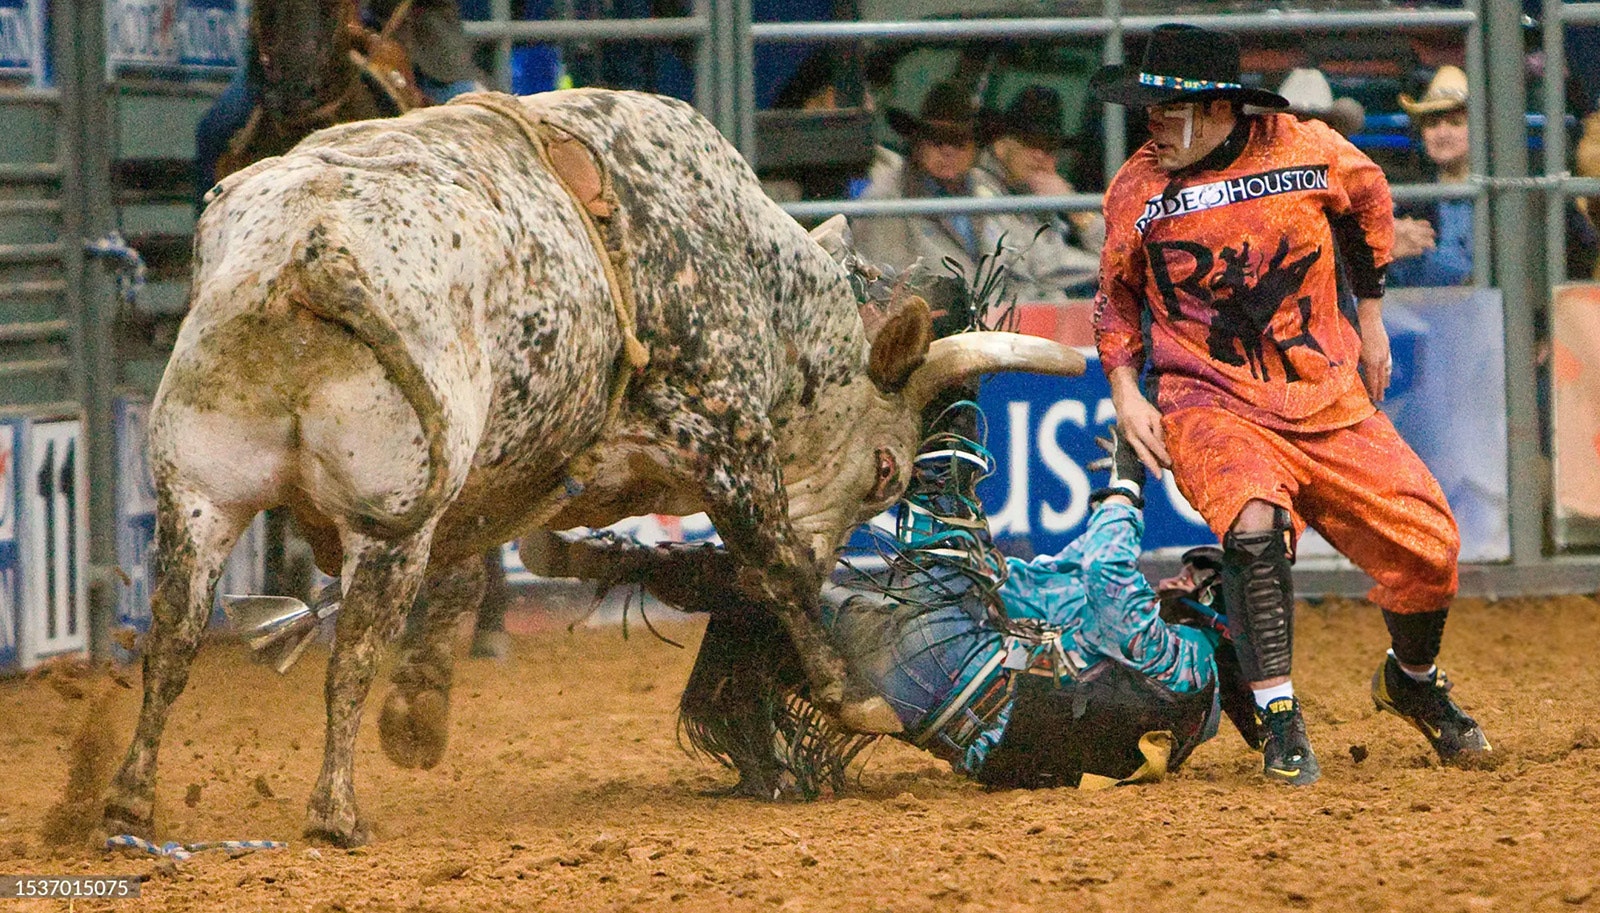 Douglas Duncan is thrown and then charged by a bull named Johnny Ho as bullfighter Dusty Tuckness moves in to draw the bull away from the rider at the Houston Livestock Show and Rodeo on March 13, 2009, in Houston.